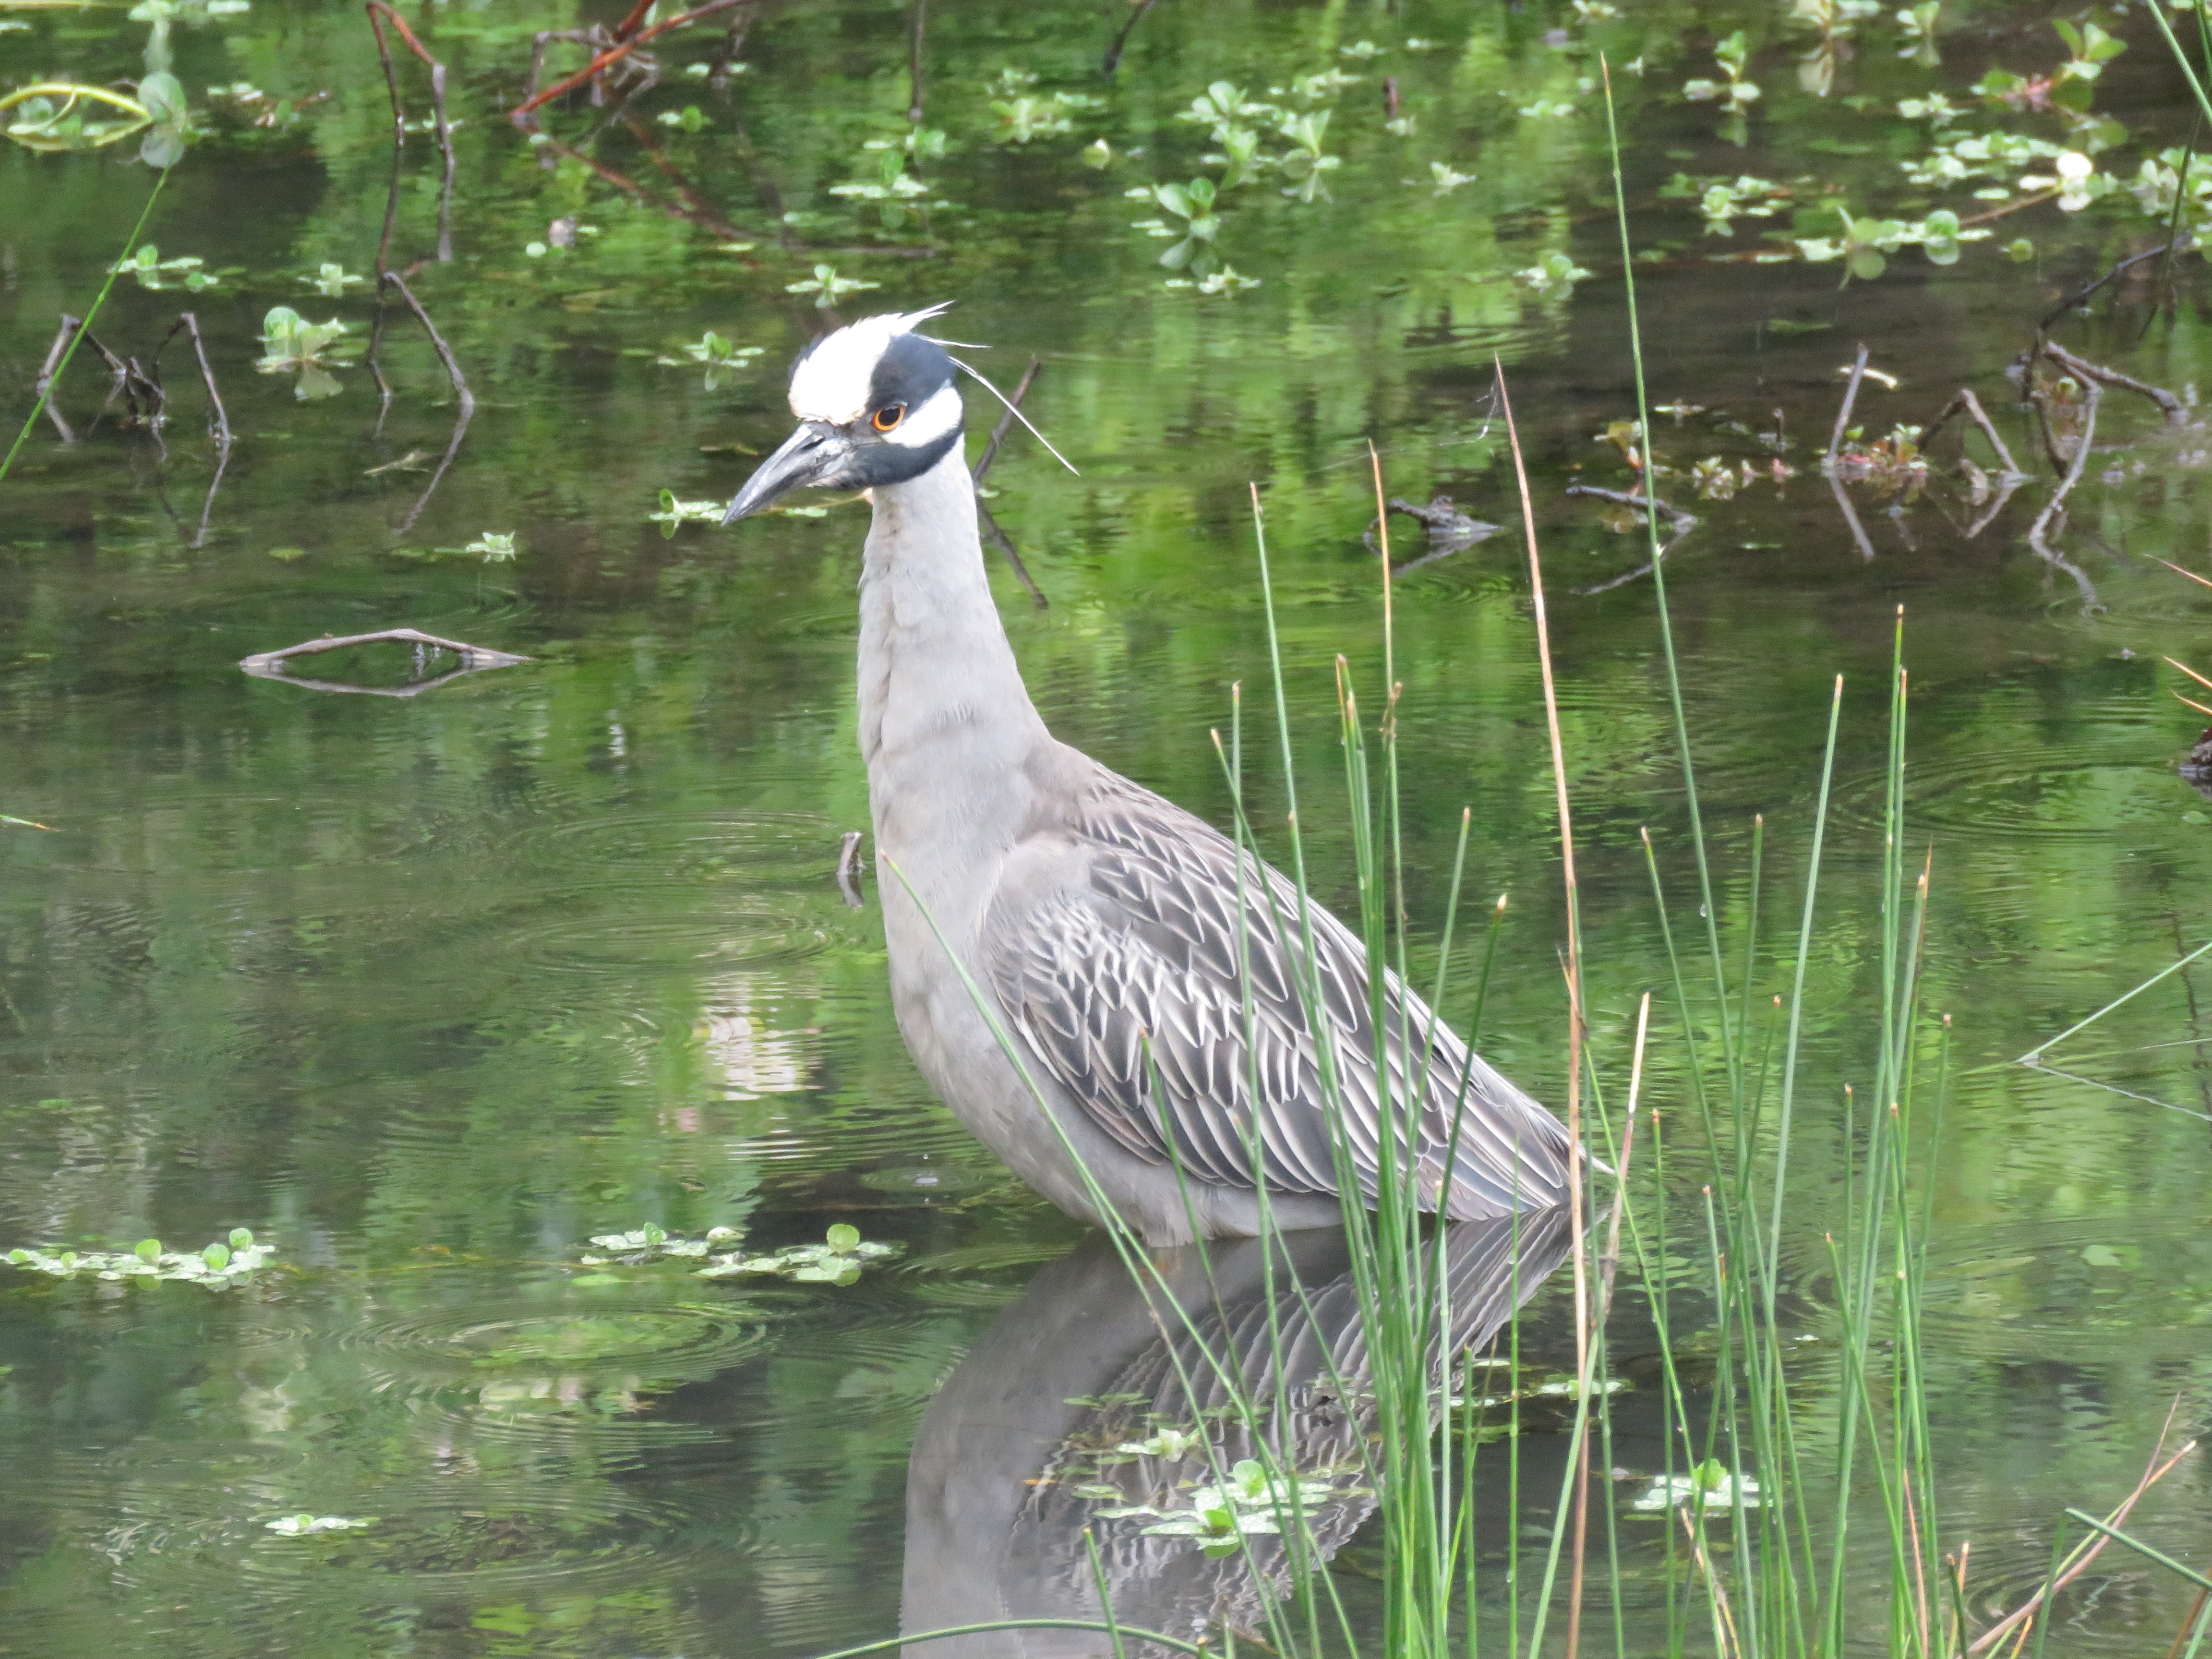 Yellow-crowned Night-Heron, photo by Fred Shaffer. University of Maryland Campus, May 1, 2016. Macaulay LIbrary ML27955371